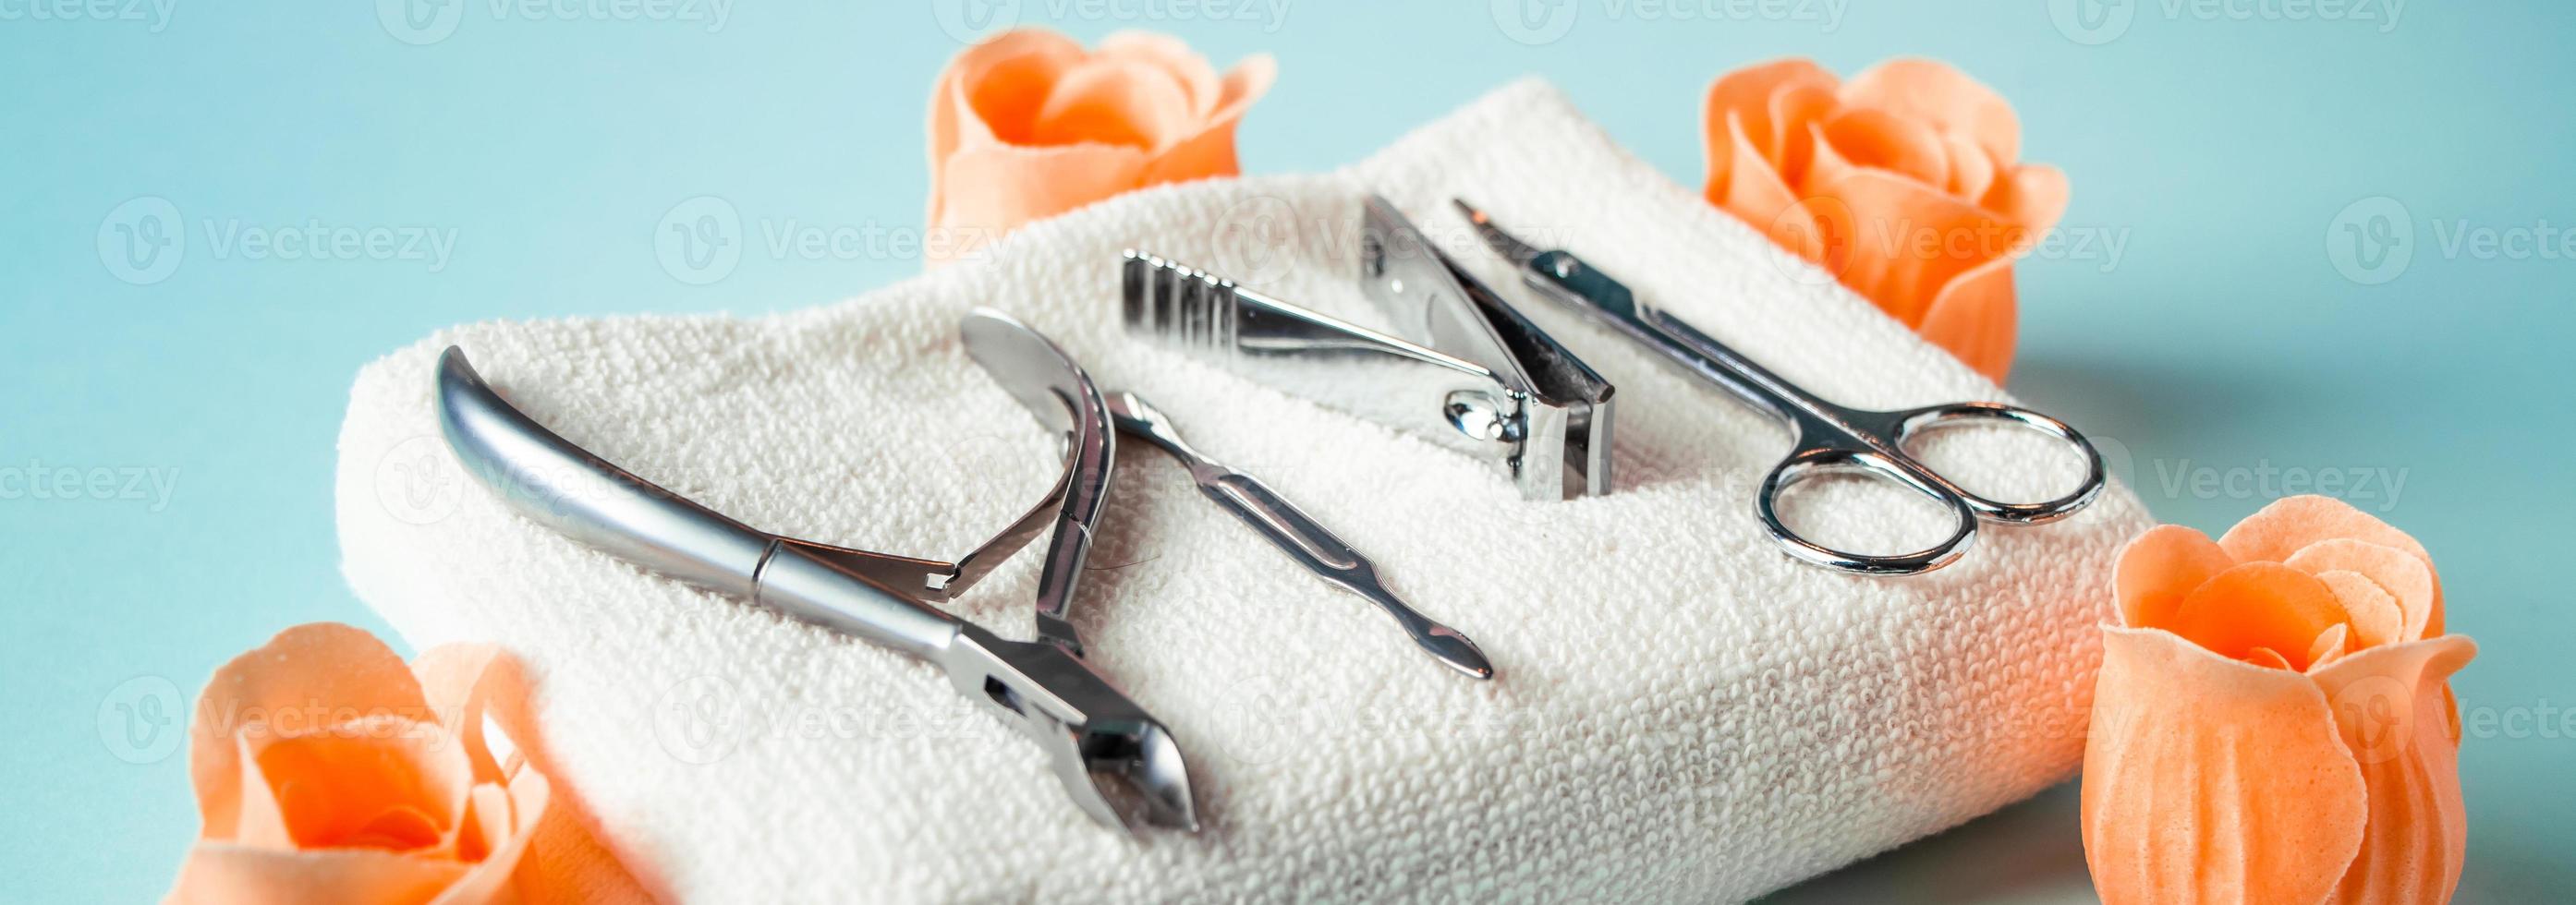 Tools for manicure and nail care on blue background. photo